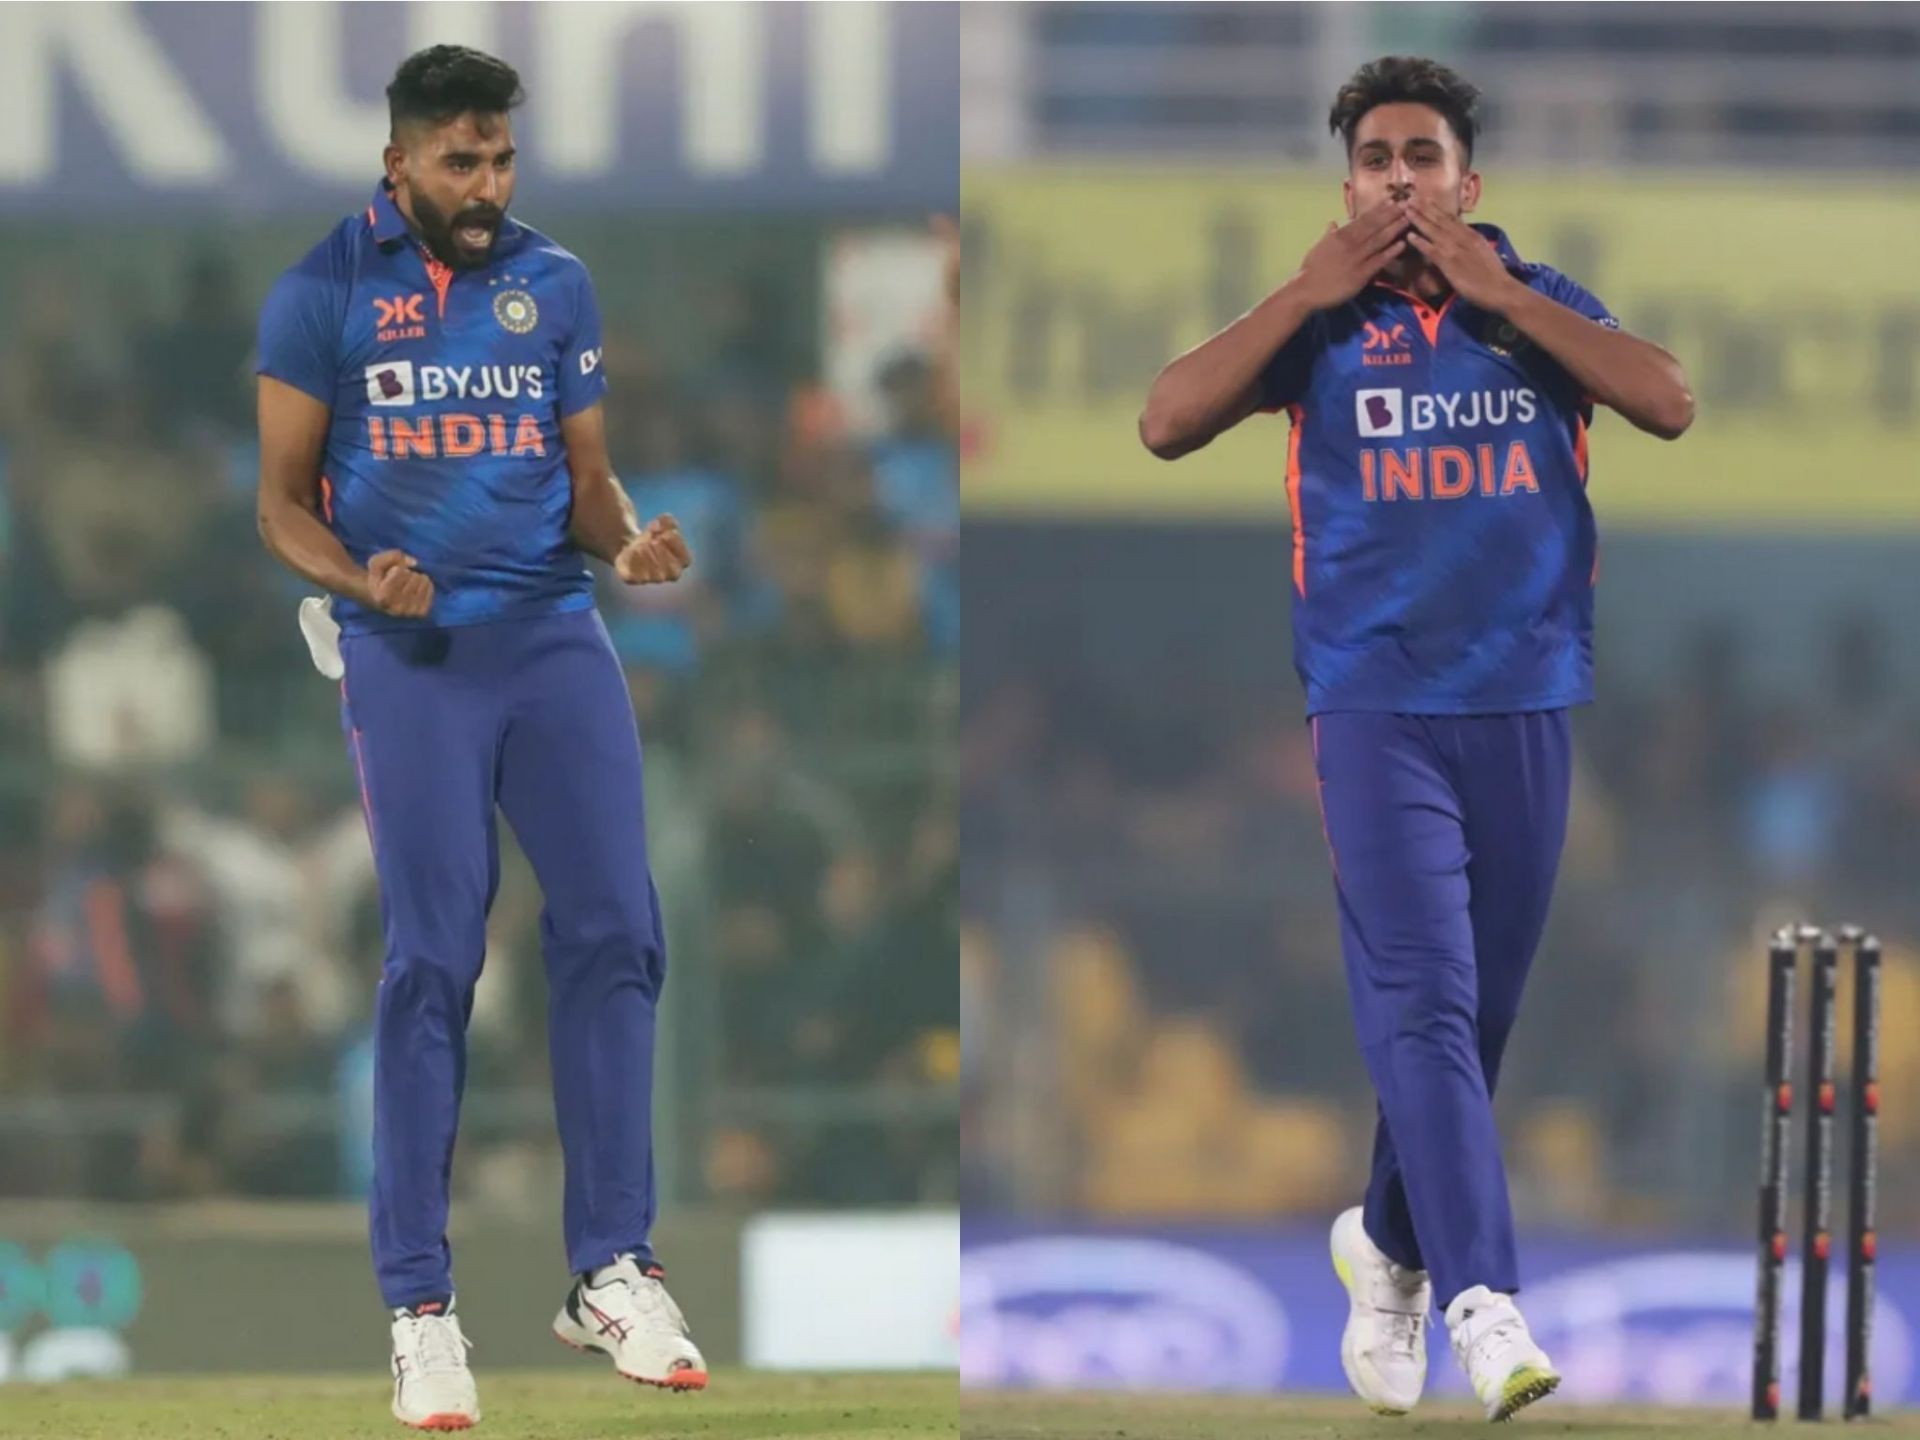 Mohammed Siraj and Umran Malik have been in top form for India.